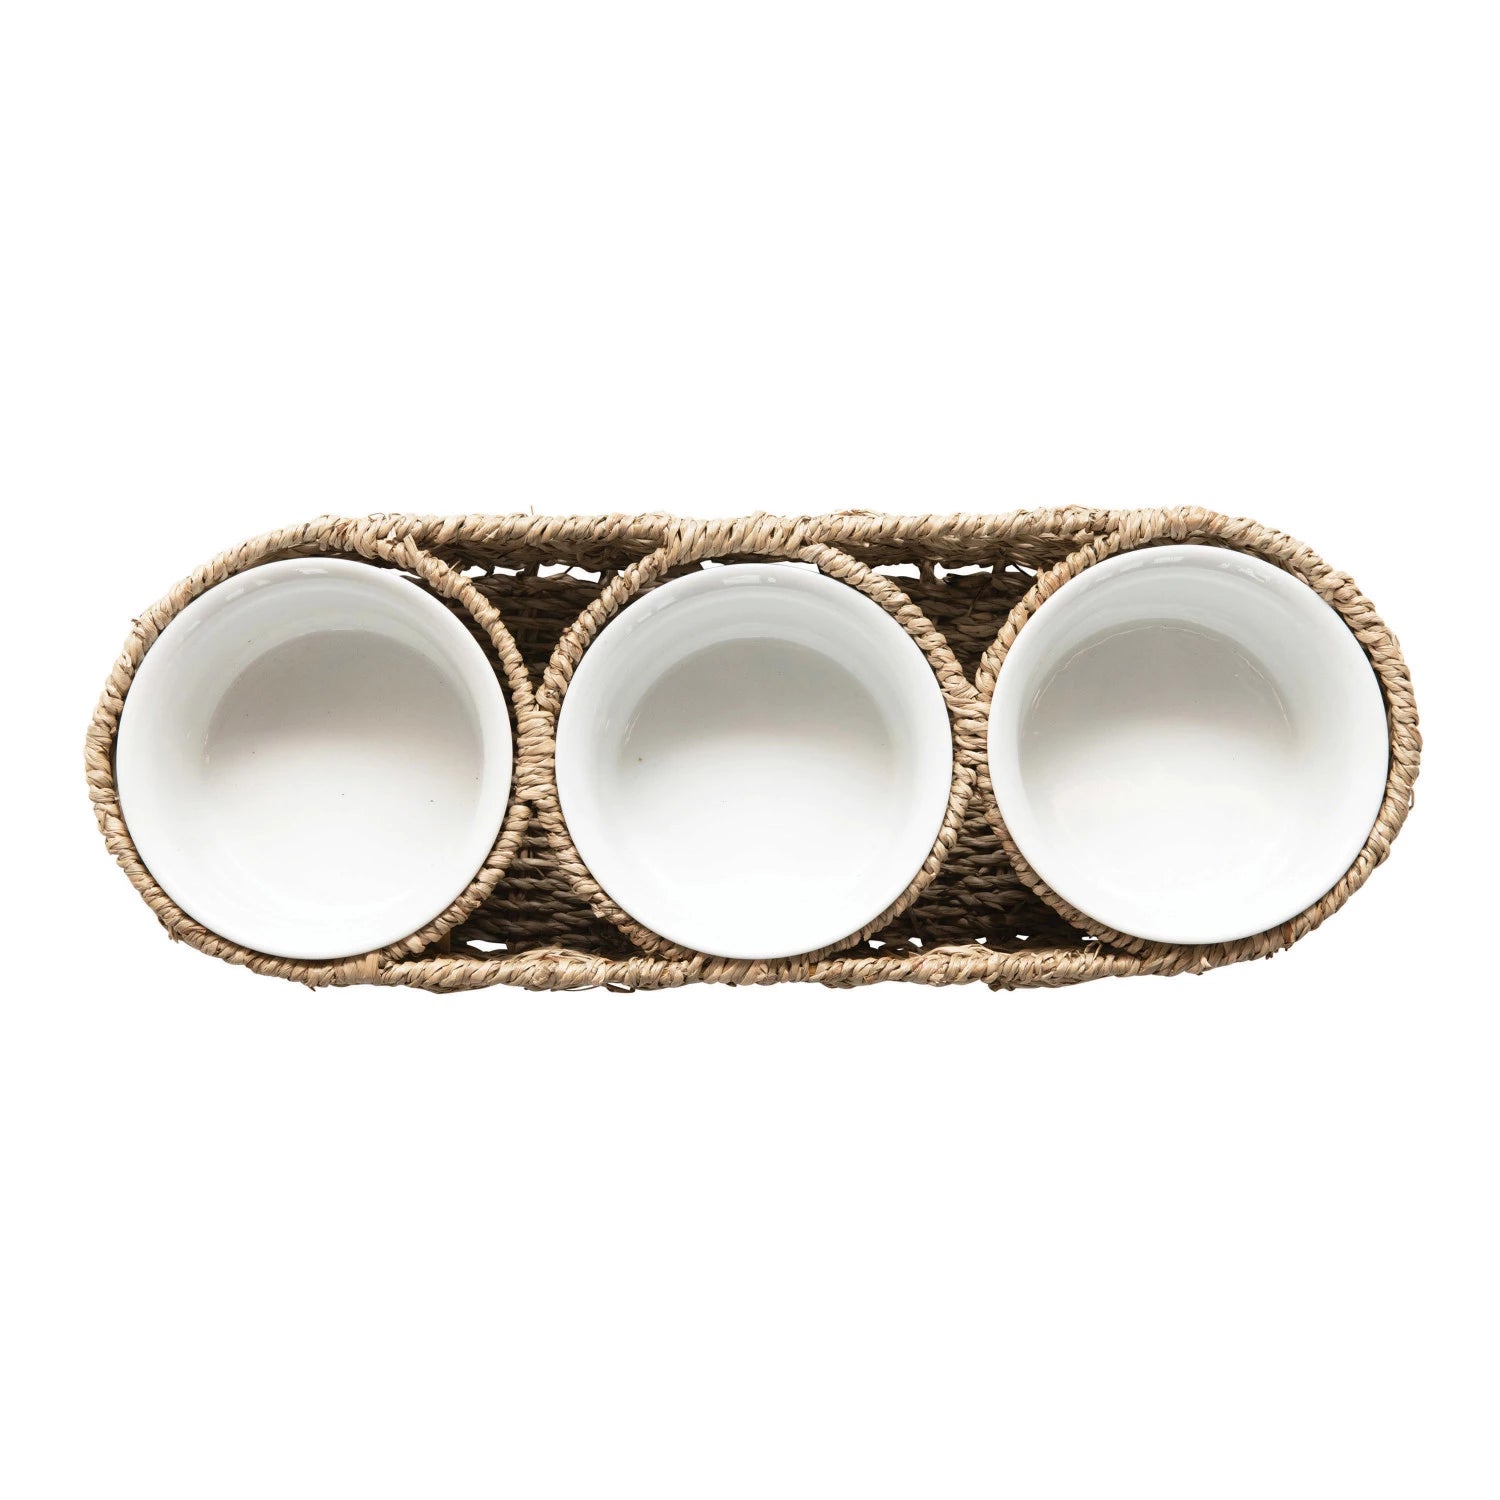 Hand Woven Basket with Ceramic Bowls